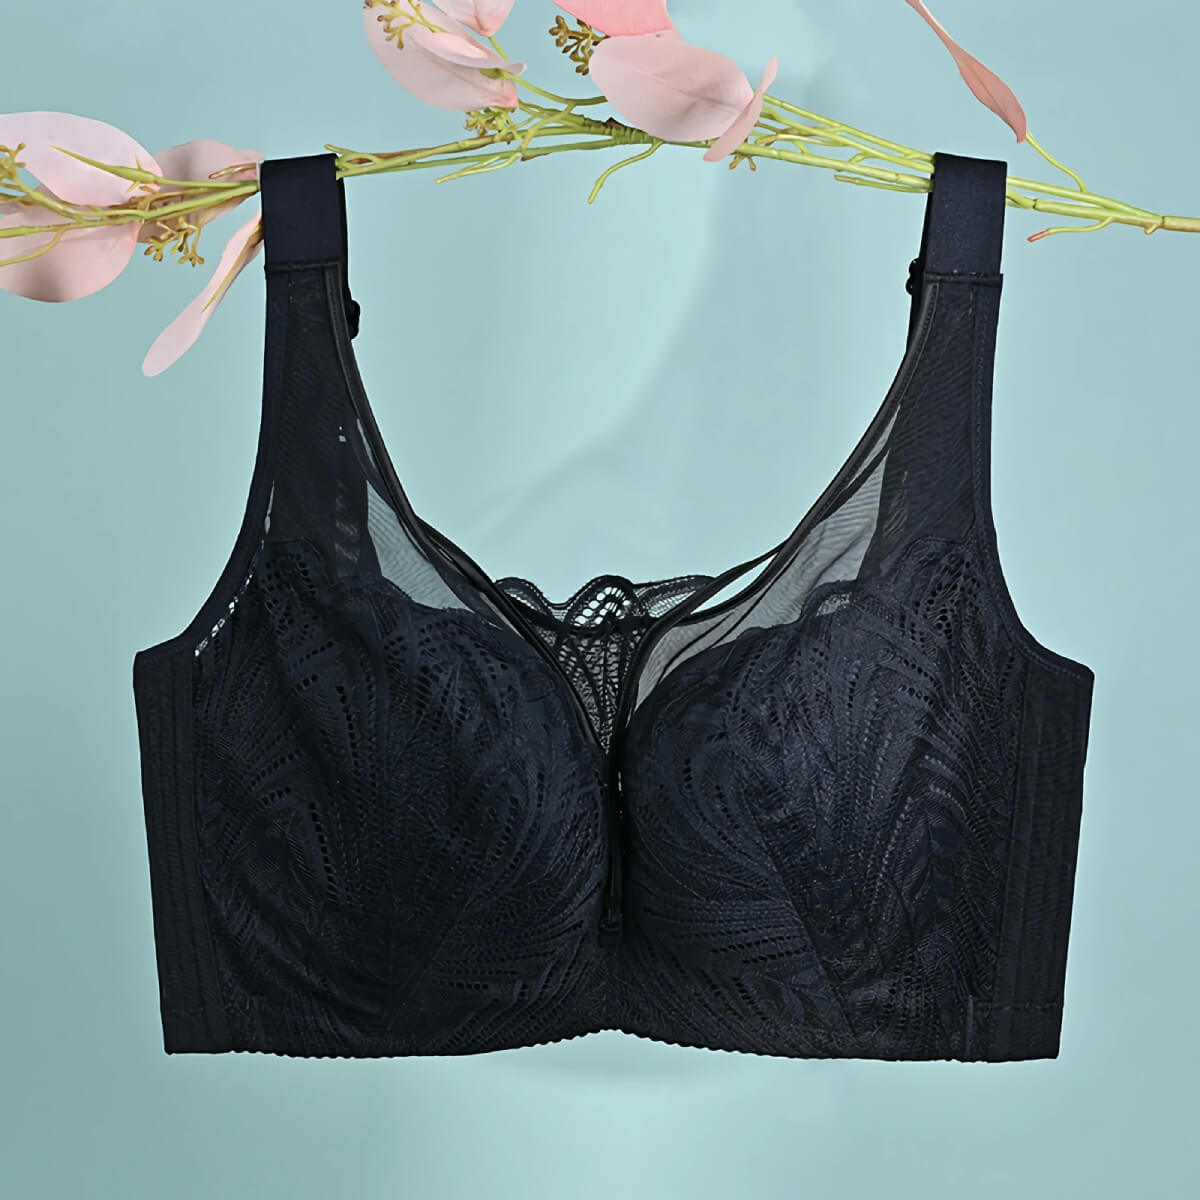 Womens Cotton Minimizer Bras For Older Women Full Coverage, Wire Free  Support, Plus Size Options B 42 From Peanutoil, $12.02